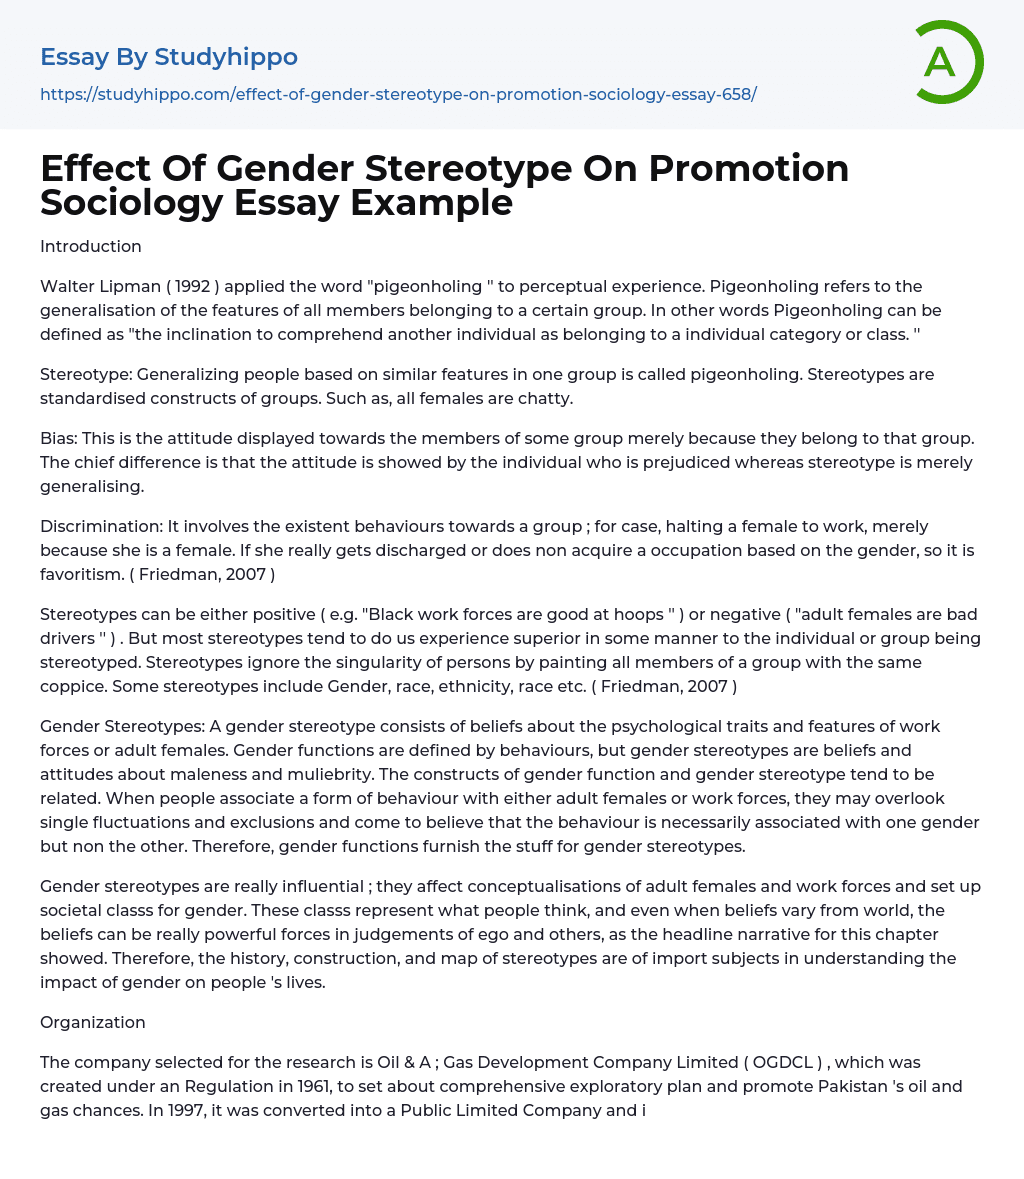 Effect Of Gender Stereotype On Promotion Sociology Essay Example